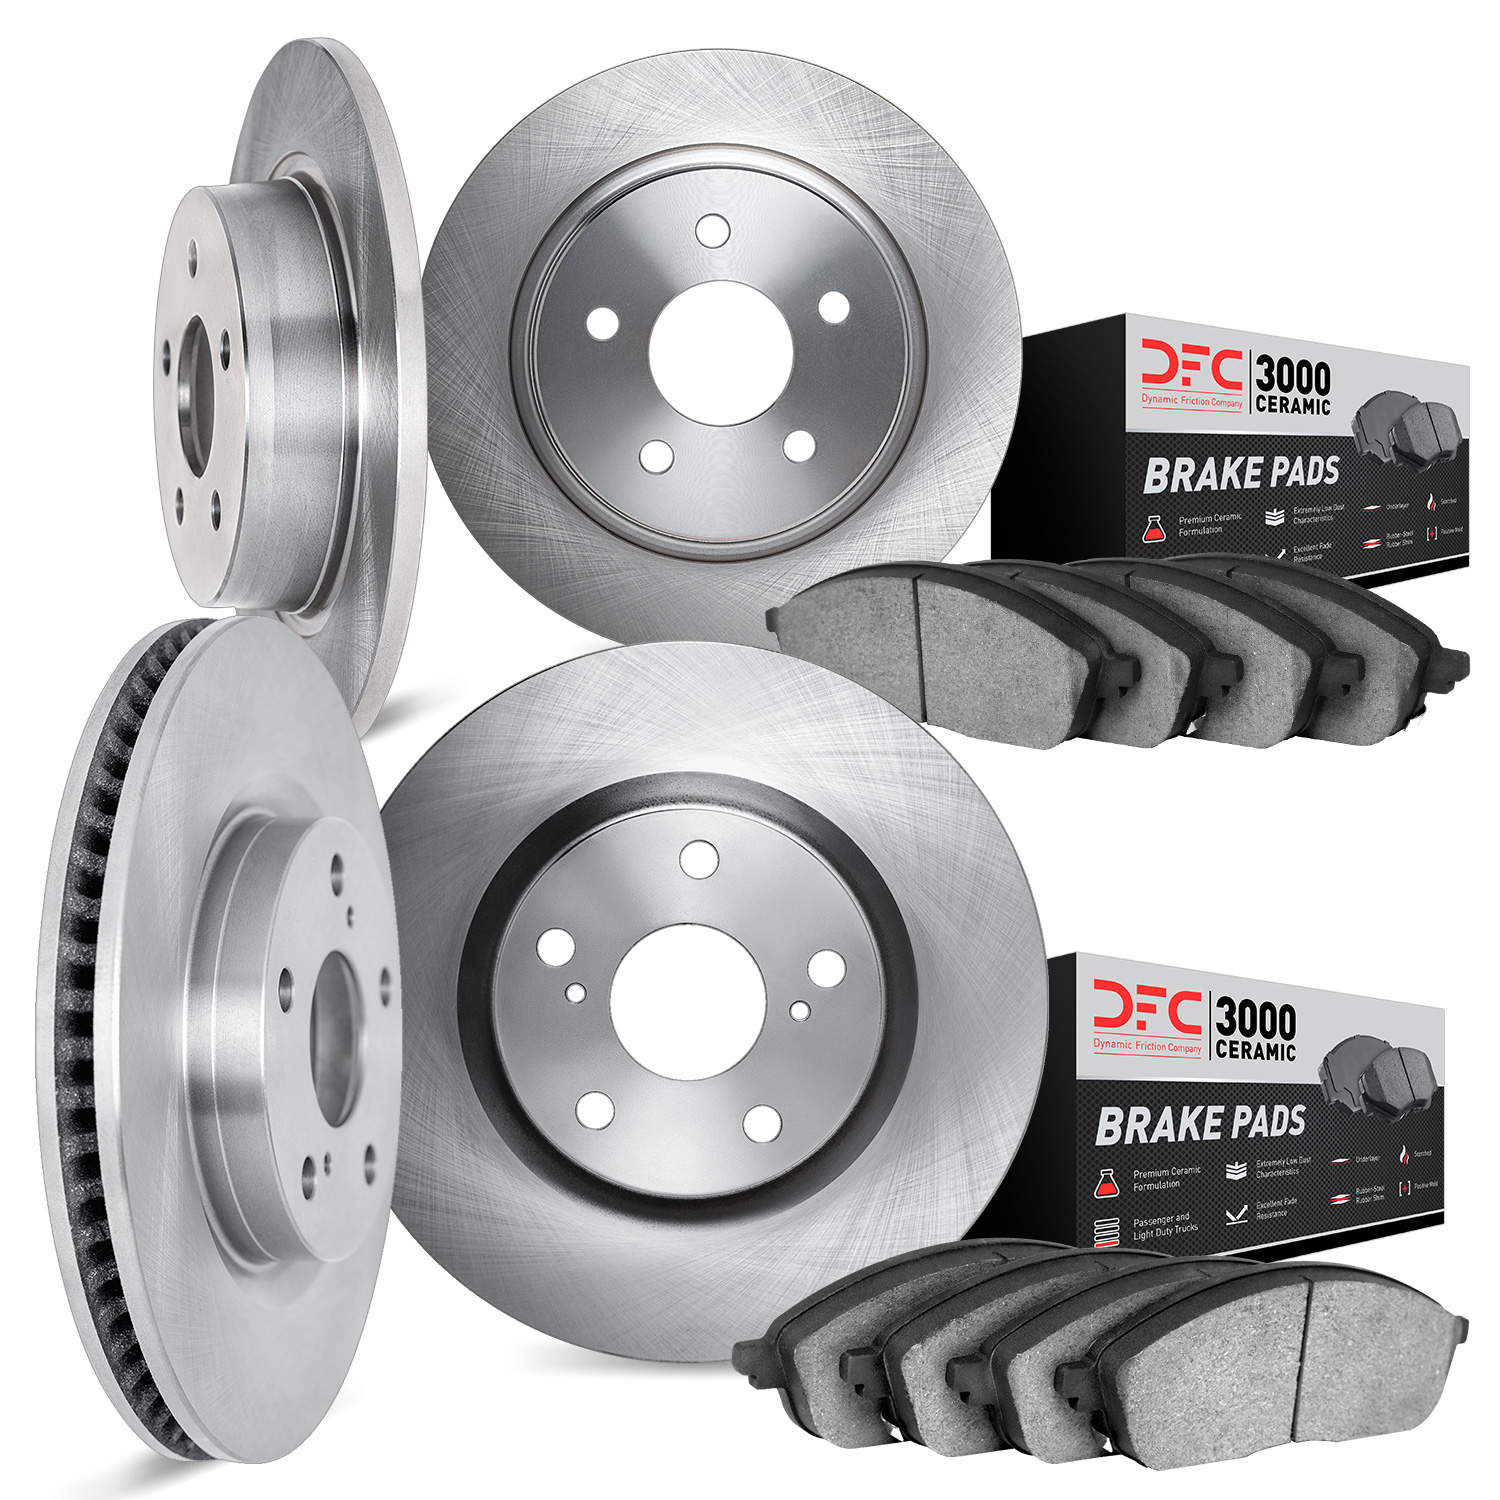 6304-59077 Brake Rotors with 3000-Series Ceramic Brake Pads Kit, Fits Select Acura/Honda, Position: Front and Rear